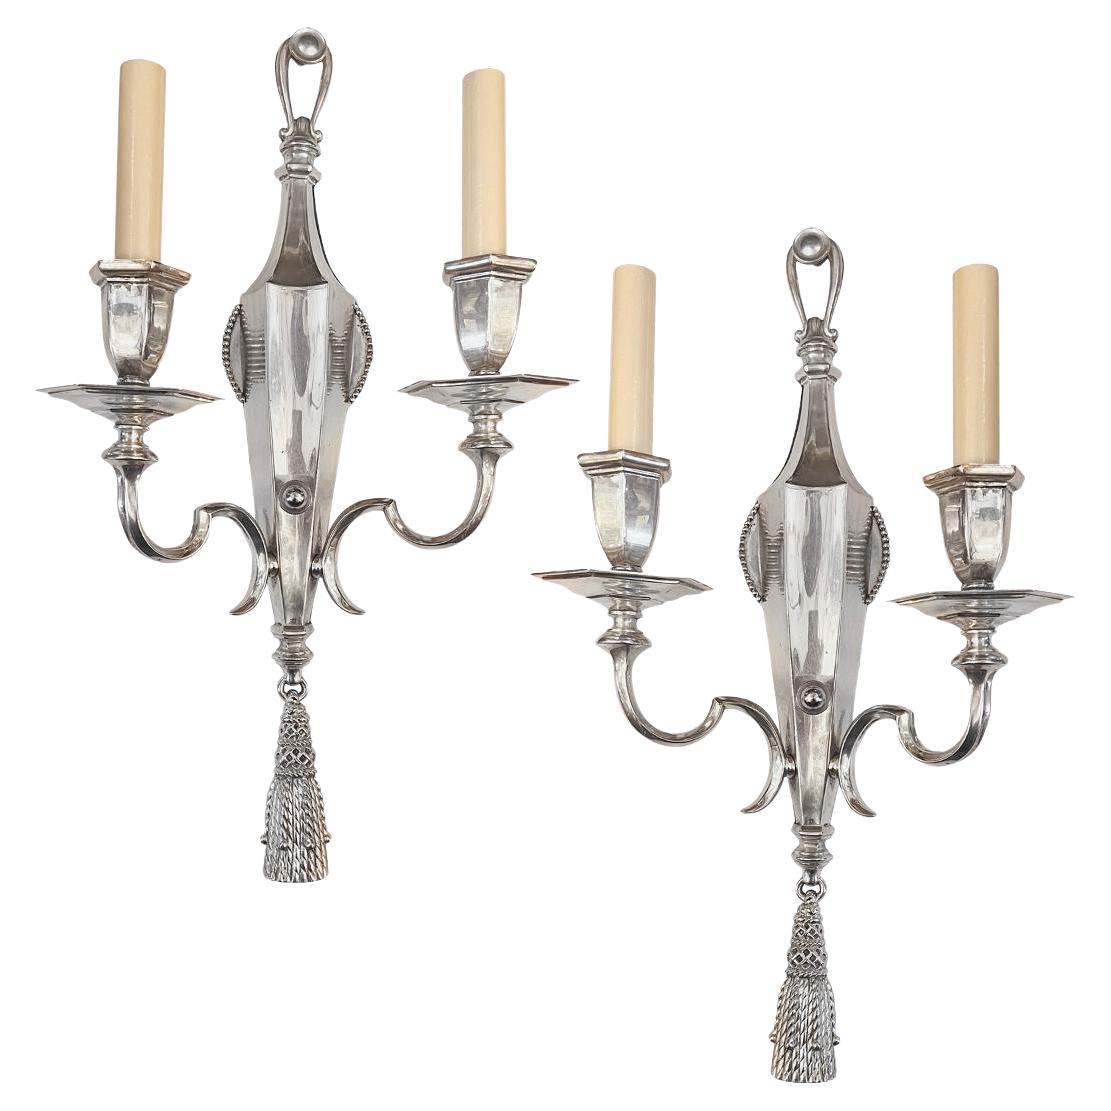 Pair of Silver Plated Sconces